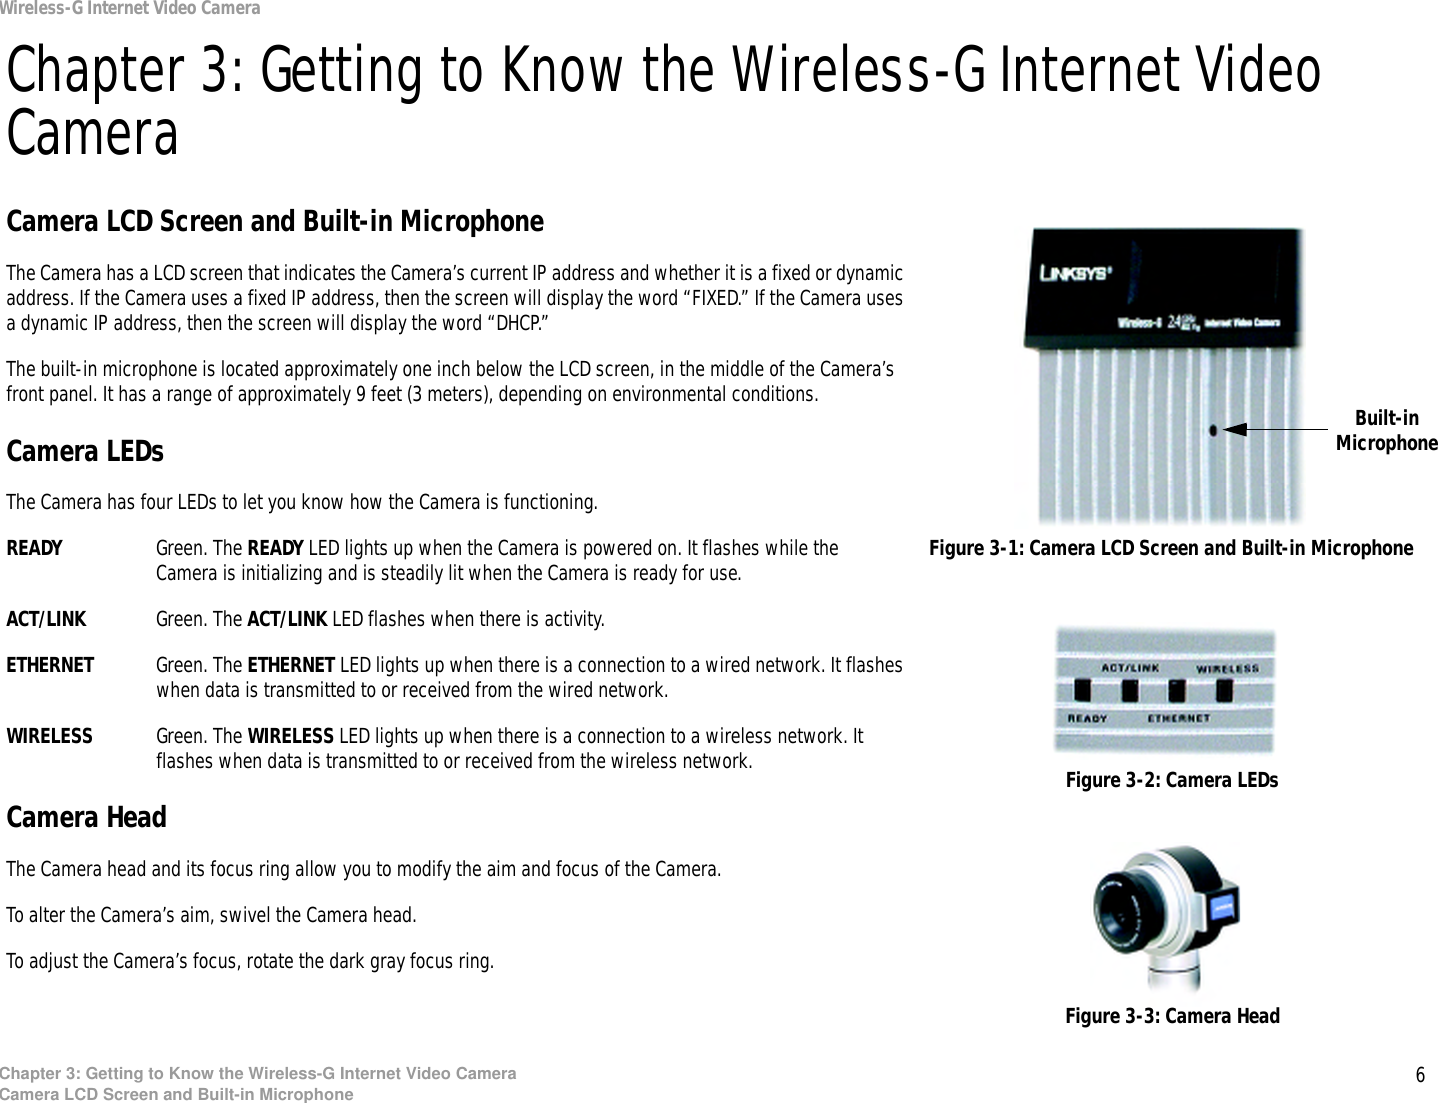 6Chapter 3: Getting to Know the Wireless-G Internet Video CameraCamera LCD Screen and Built-in MicrophoneWireless-G Internet Video CameraChapter 3: Getting to Know the Wireless-G Internet Video CameraCamera LCD Screen and Built-in MicrophoneThe Camera has a LCD screen that indicates the Camera’s current IP address and whether it is a fixed or dynamic address. If the Camera uses a fixed IP address, then the screen will display the word “FIXED.” If the Camera uses a dynamic IP address, then the screen will display the word “DHCP.” The built-in microphone is located approximately one inch below the LCD screen, in the middle of the Camera’s front panel. It has a range of approximately 9 feet (3 meters), depending on environmental conditions.Camera LEDsThe Camera has four LEDs to let you know how the Camera is functioning.READY Green. The READY LED lights up when the Camera is powered on. It flashes while the Camera is initializing and is steadily lit when the Camera is ready for use.ACT/LINK Green. The ACT/LINK LED flashes when there is activity.ETHERNET Green. The ETHERNET LED lights up when there is a connection to a wired network. It flashes when data is transmitted to or received from the wired network.WIRELESS Green. The WIRELESS LED lights up when there is a connection to a wireless network. It flashes when data is transmitted to or received from the wireless network.Camera HeadThe Camera head and its focus ring allow you to modify the aim and focus of the Camera.To alter the Camera’s aim, swivel the Camera head.To adjust the Camera’s focus, rotate the dark gray focus ring.Figure 3-1: Camera LCD Screen and Built-in MicrophoneFigure 3-2: Camera LEDsFigure 3-3: Camera HeadBuilt-in Microphone